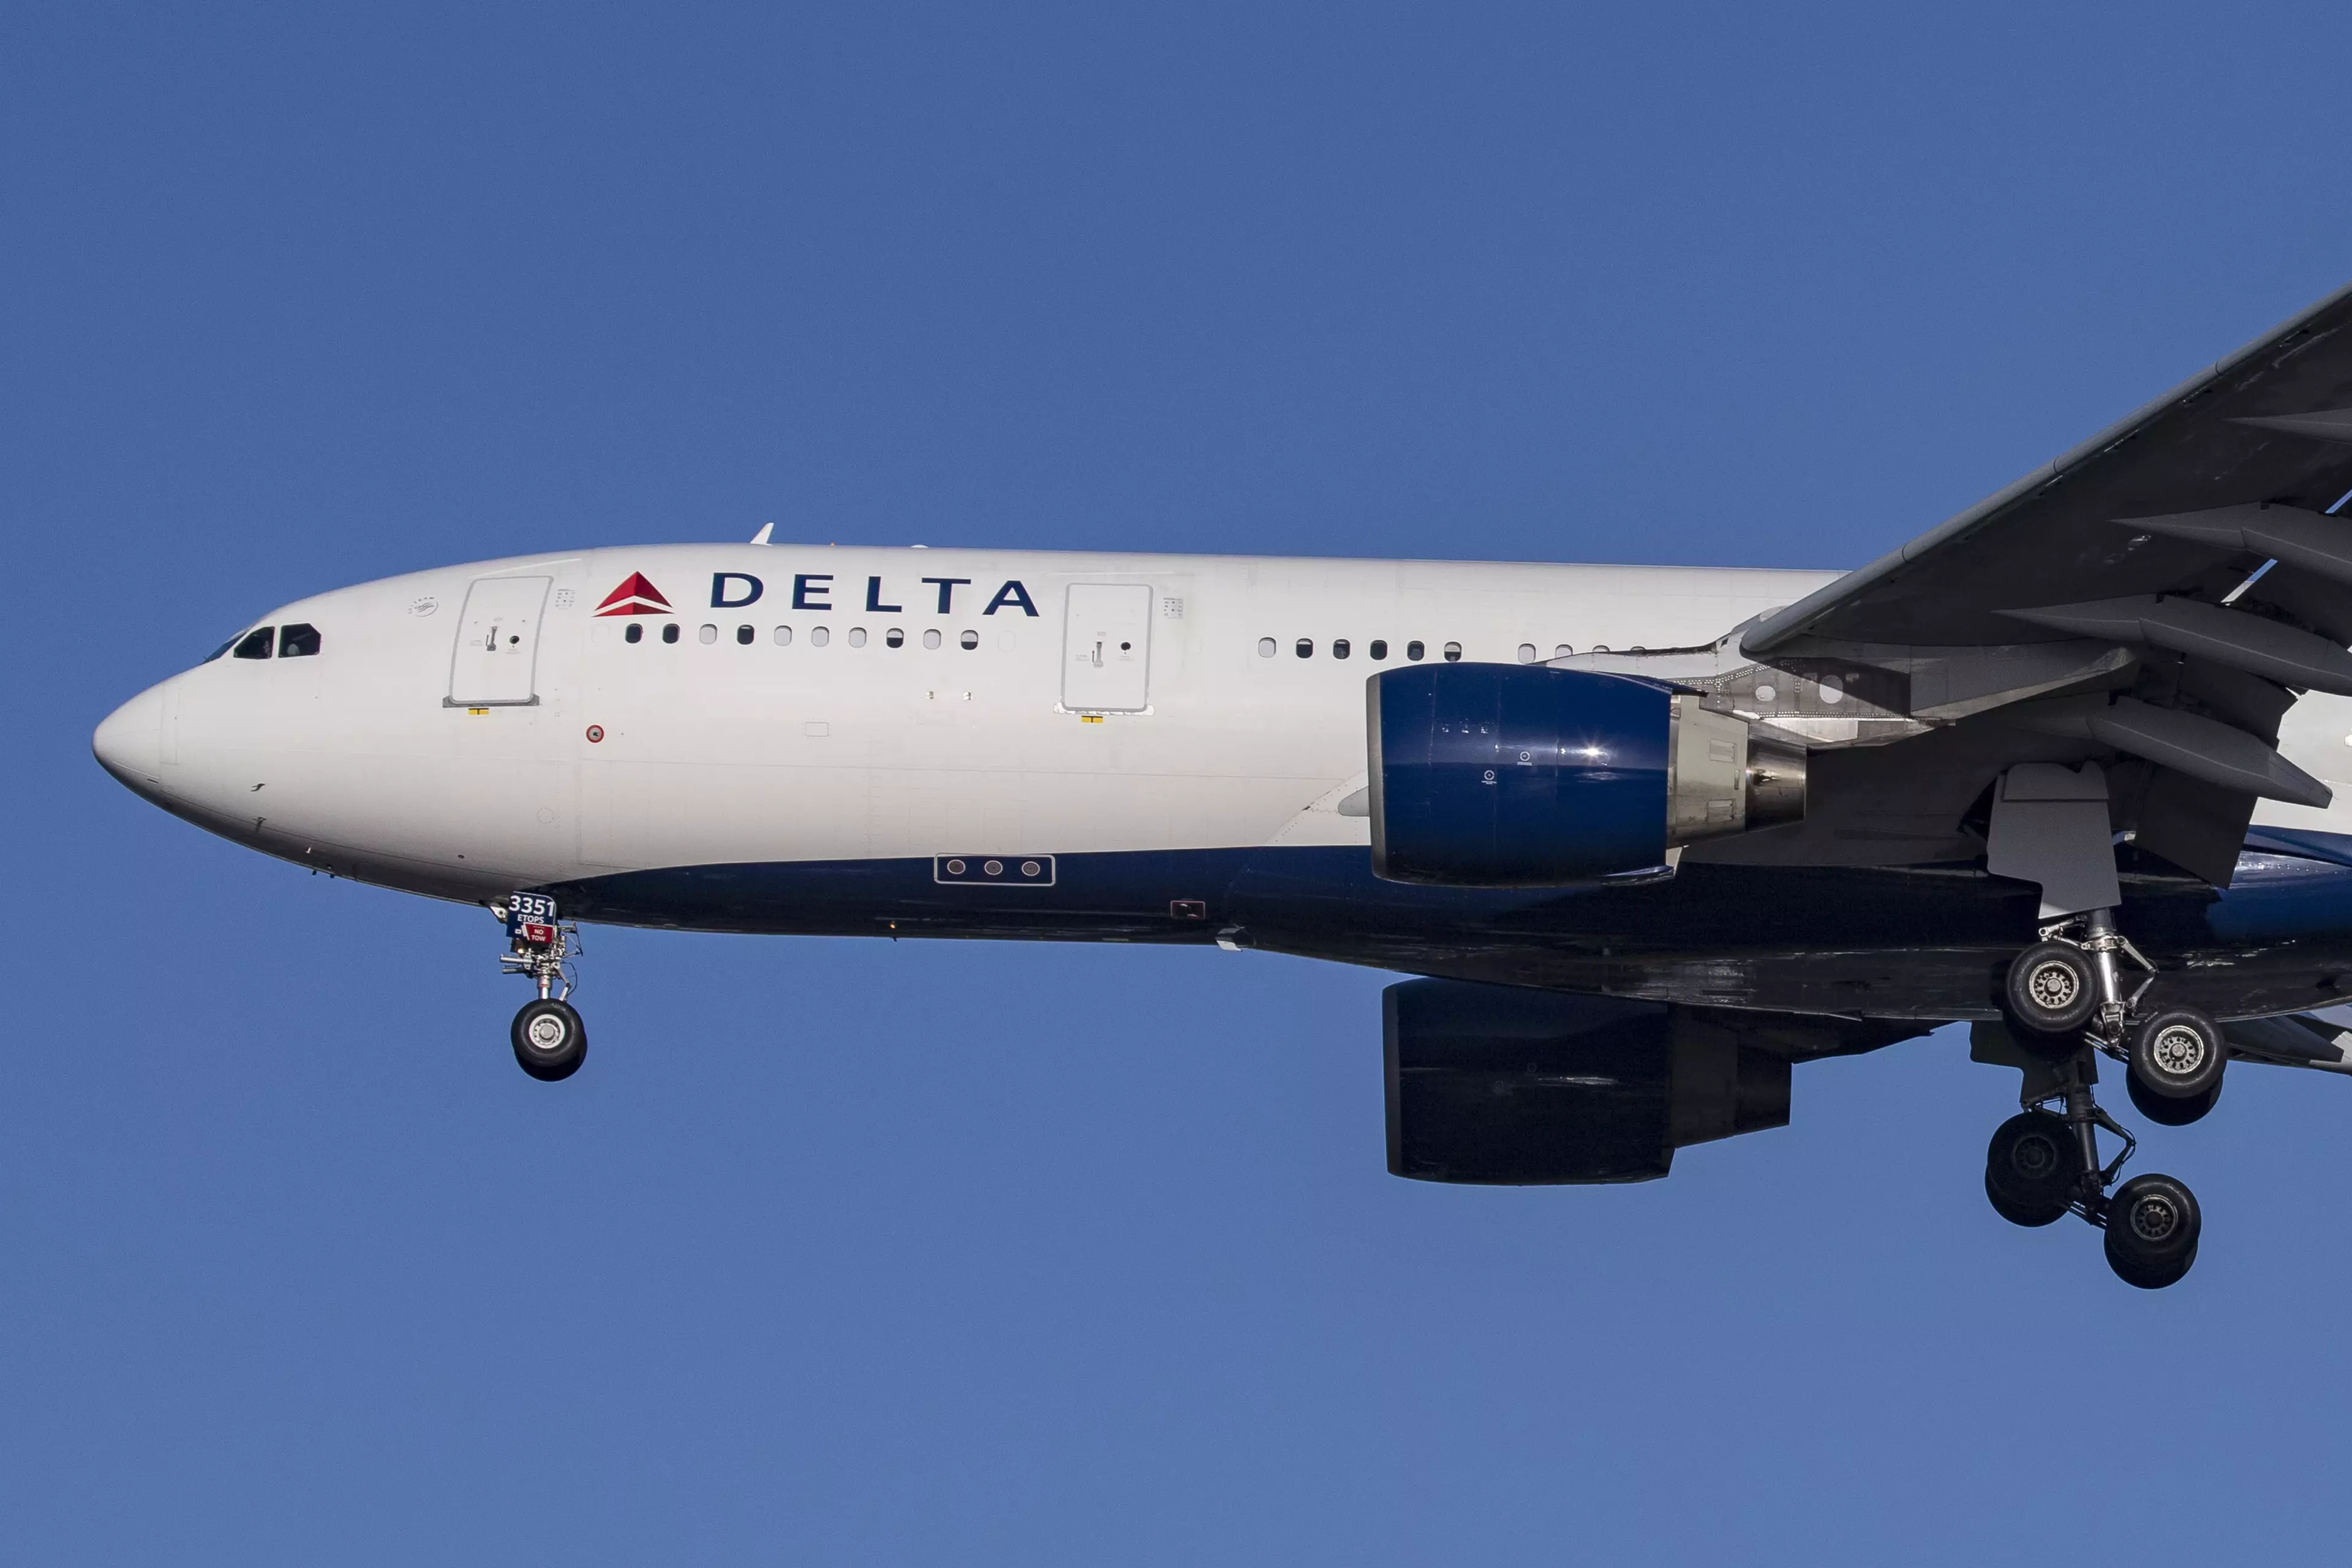 A Delta Airlines passenger reportedly attempted to open the plane's door mid-flight recently.